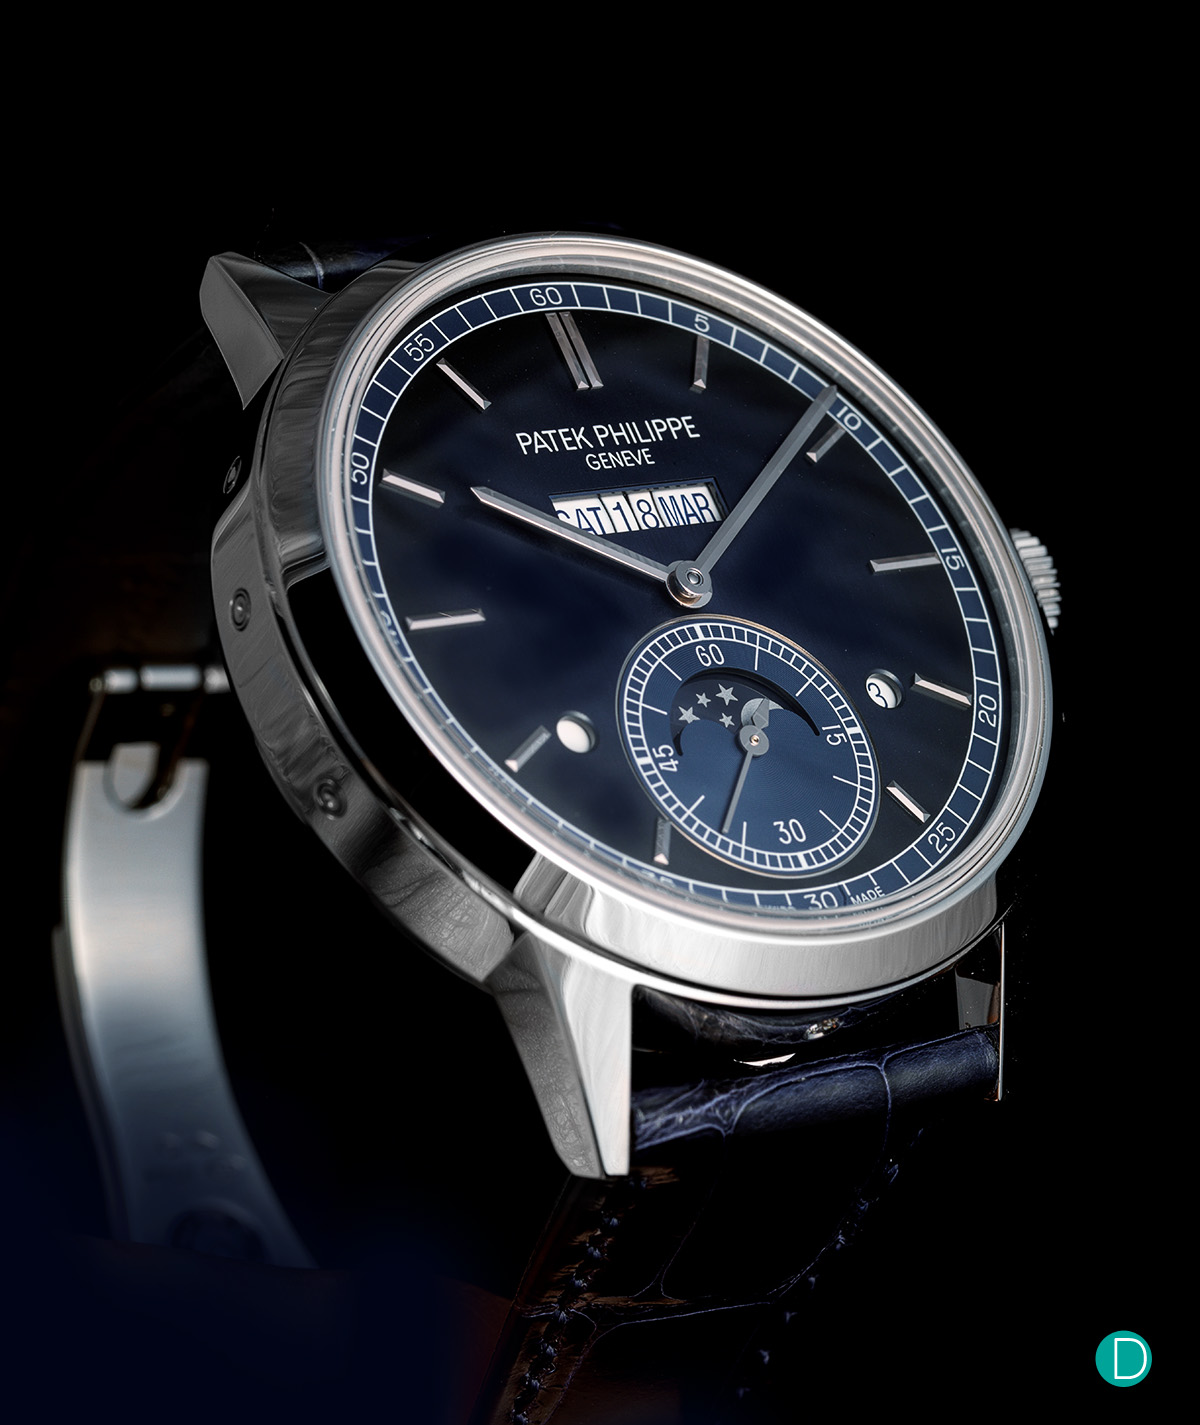 Patek Philippe 5236P In-line Perpetual Calendar Time And Watches The ...